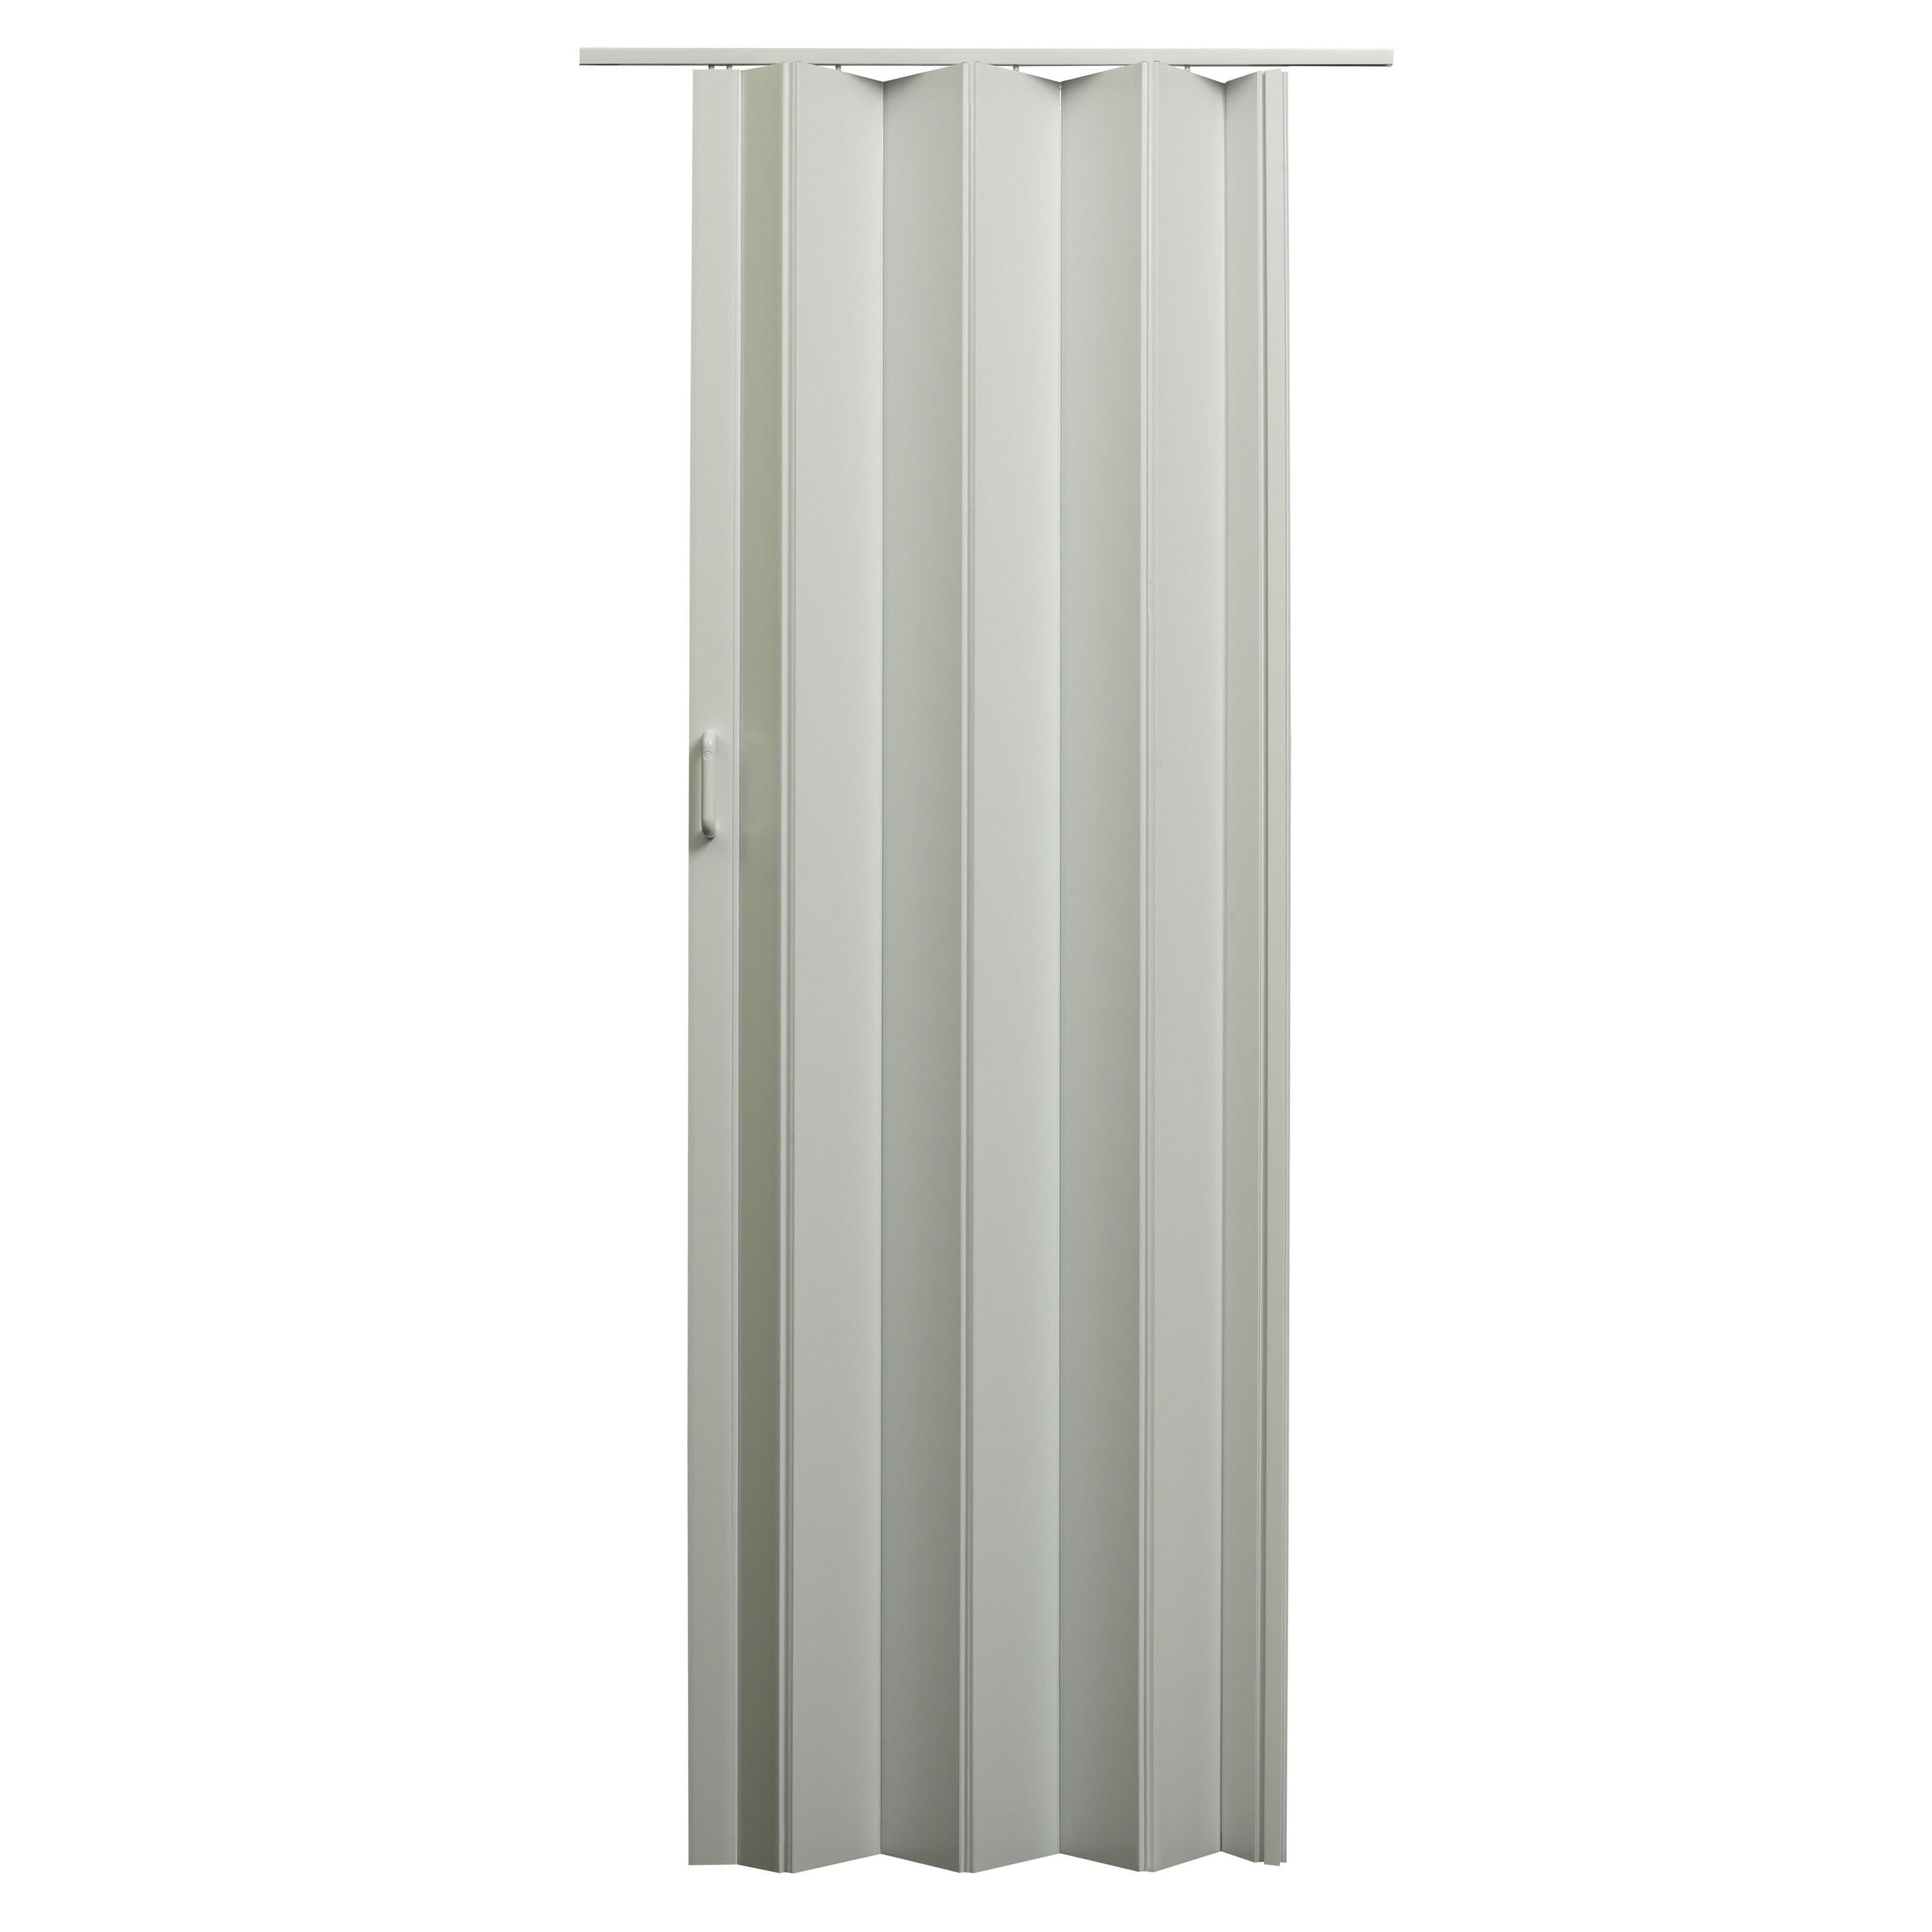 LTL Home Products SI3680CW Sienna Interior Accordion Folding Door Cottage White 36 x 80 